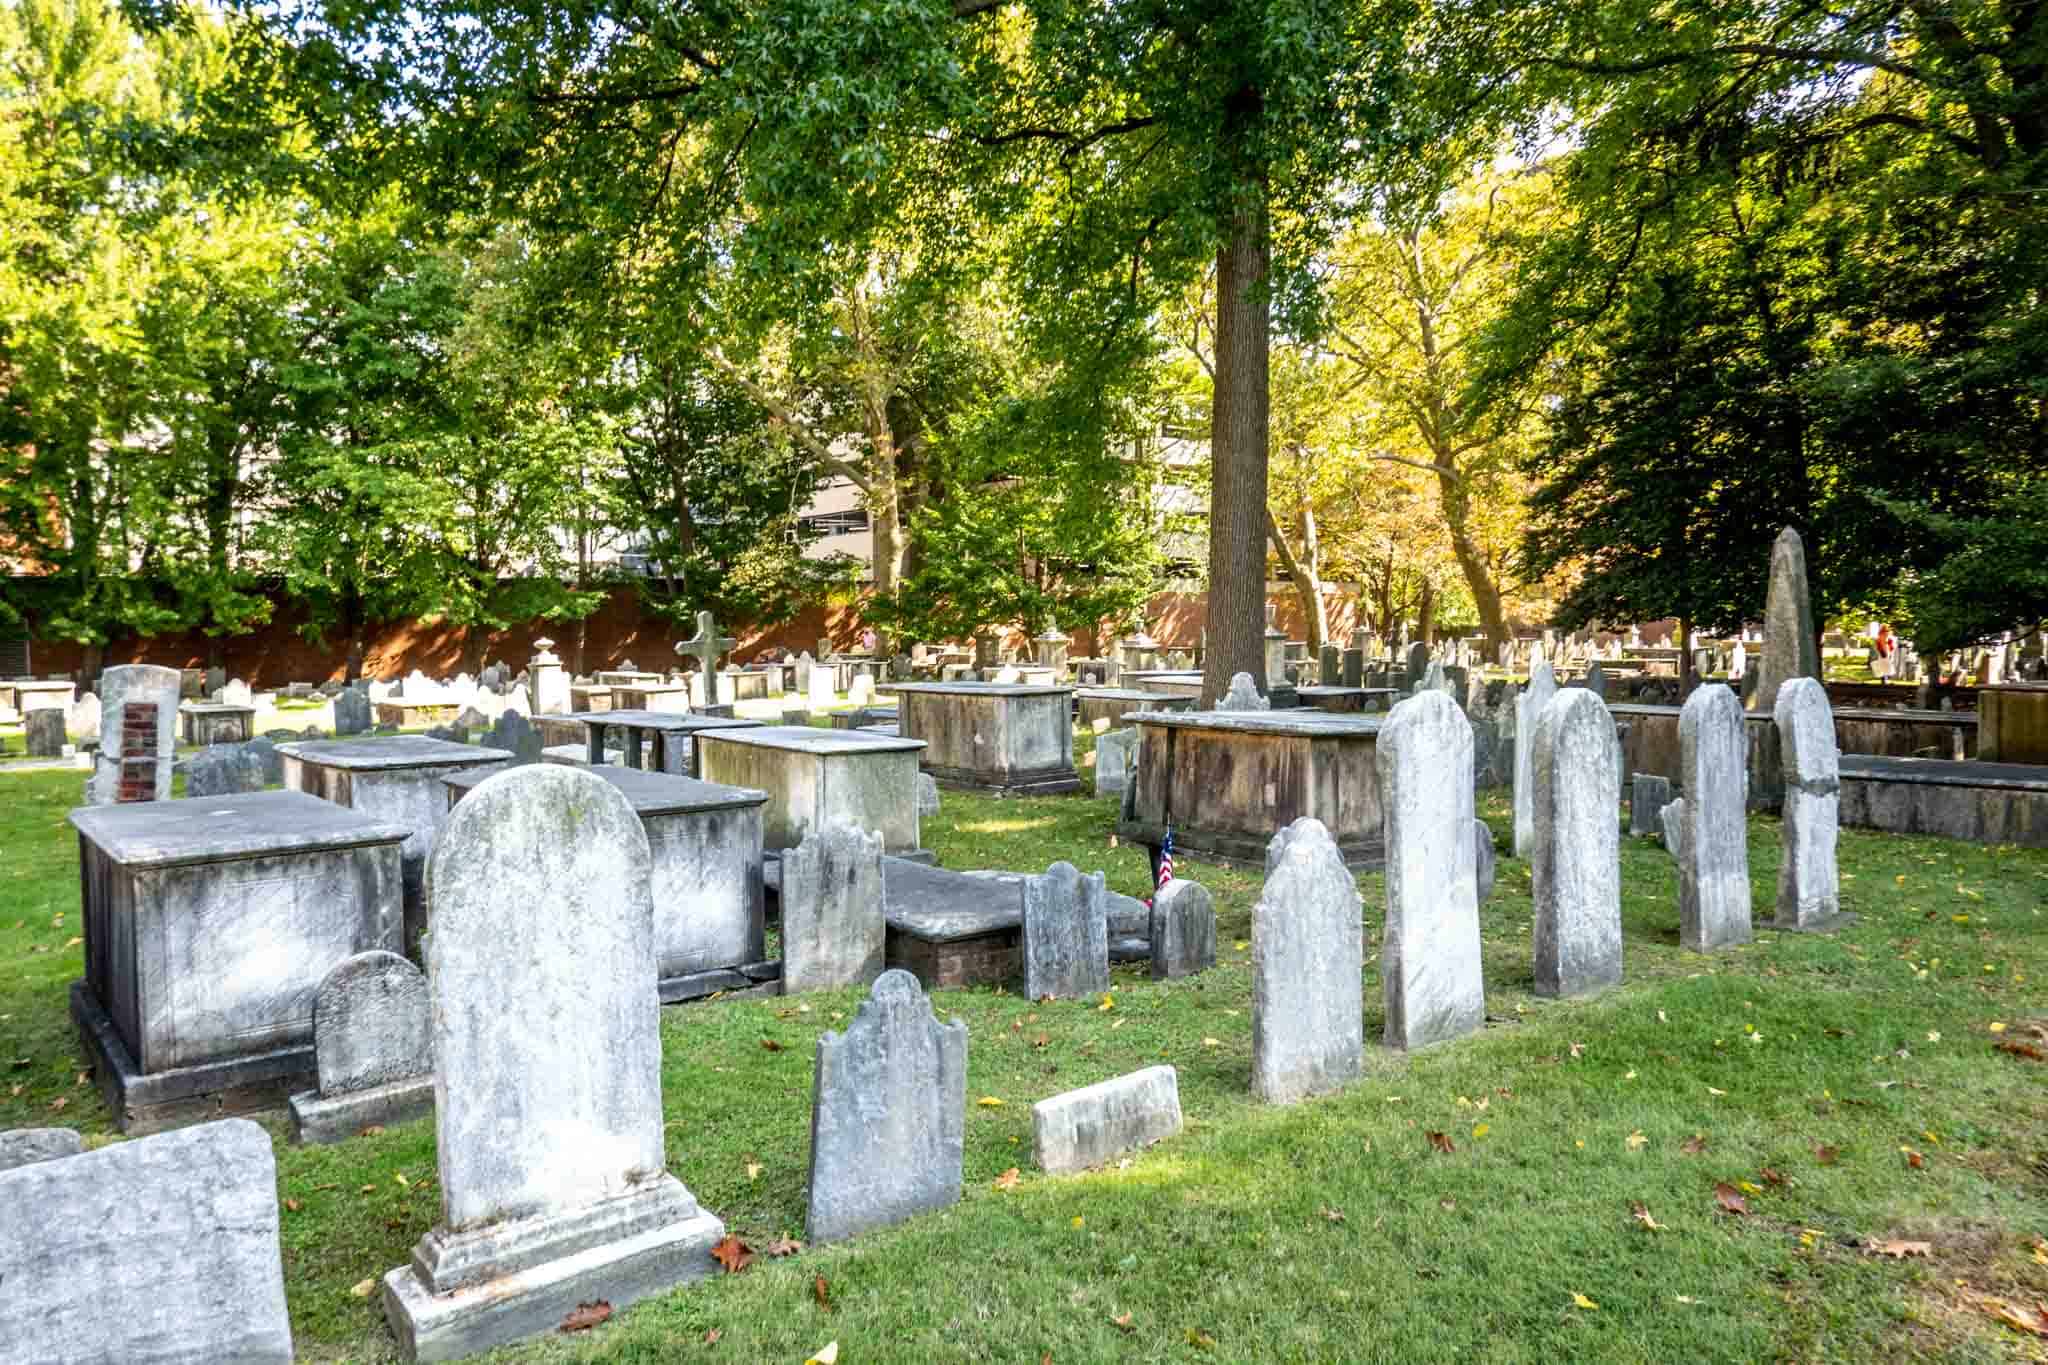 Rows of old stone headstones in a burial ground